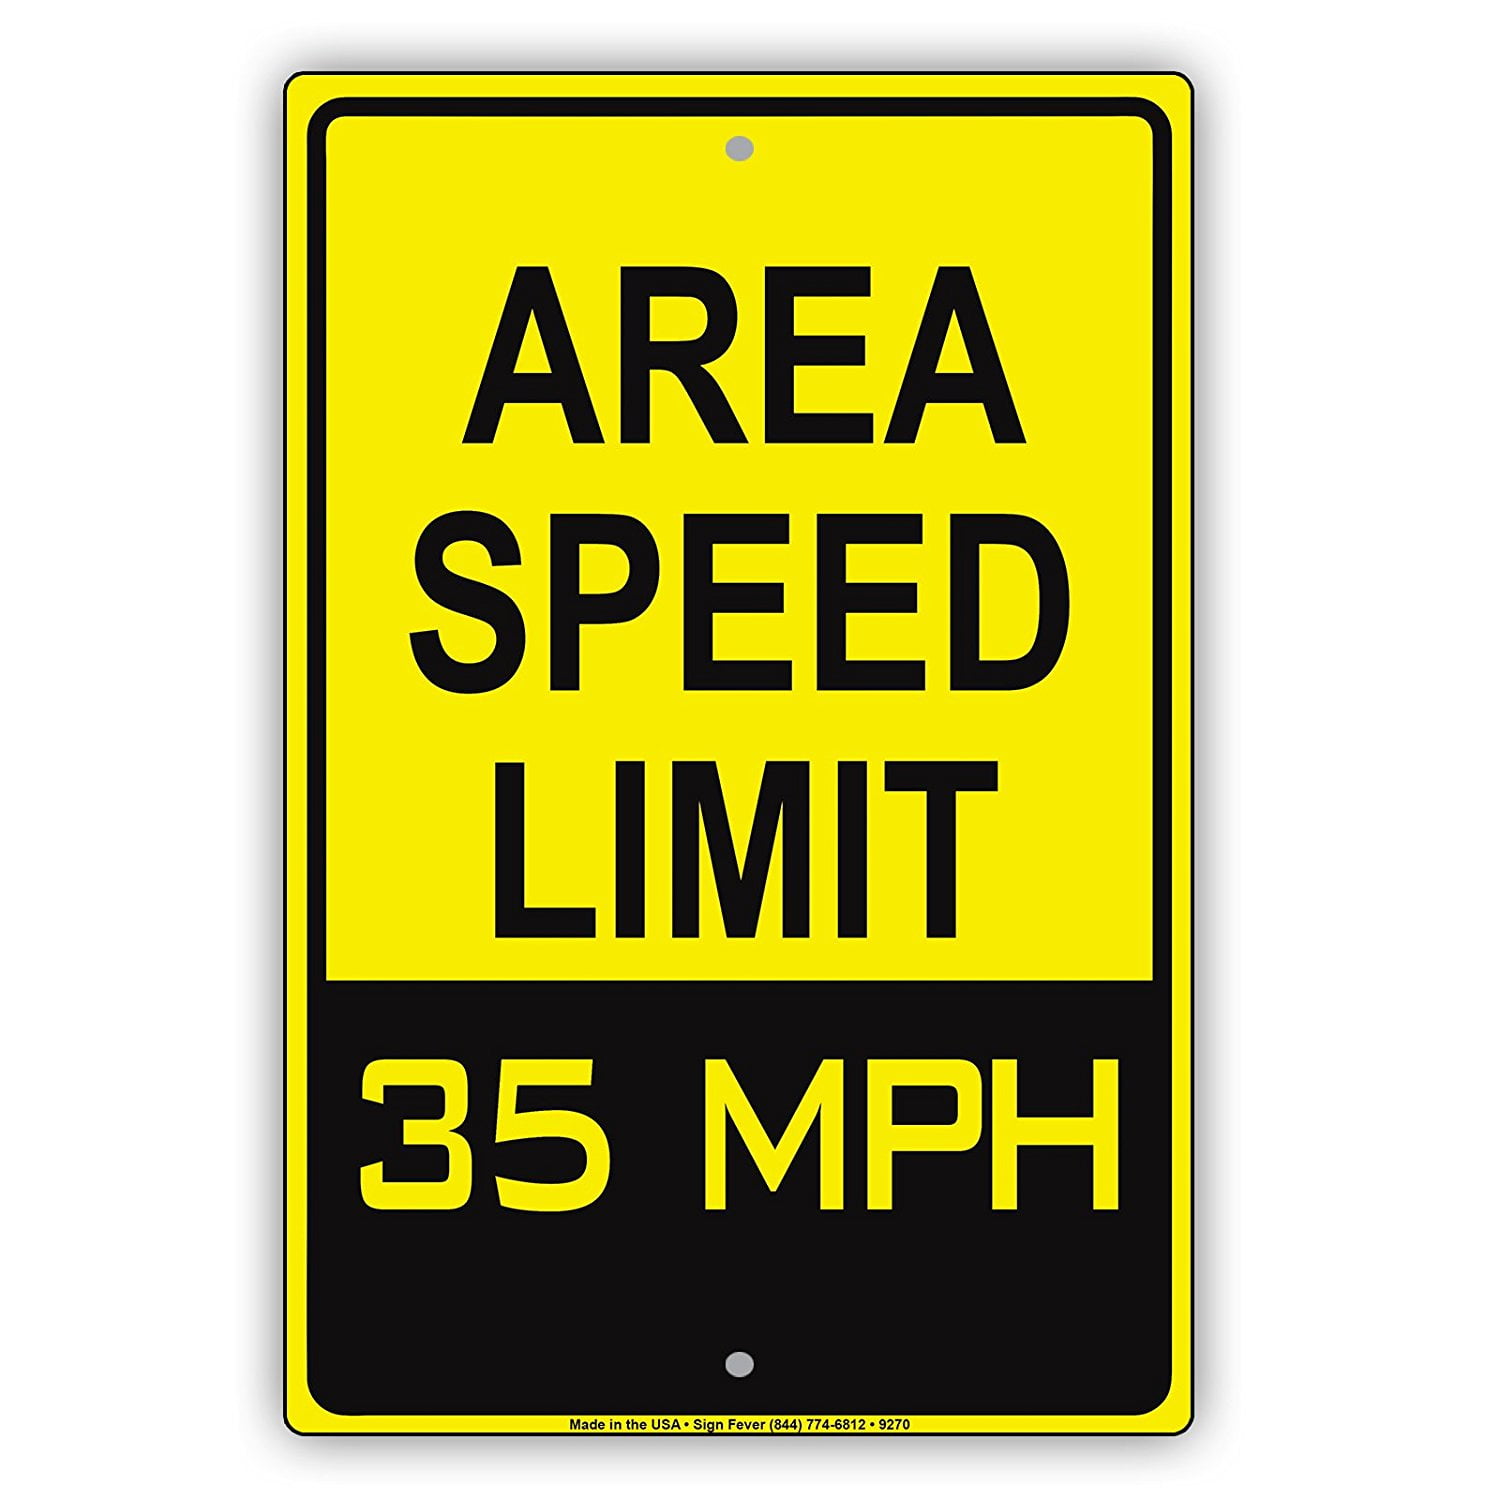 Area Speed Limit 35 Mph Miles Per Hour Zone Slow Down Warning Caution